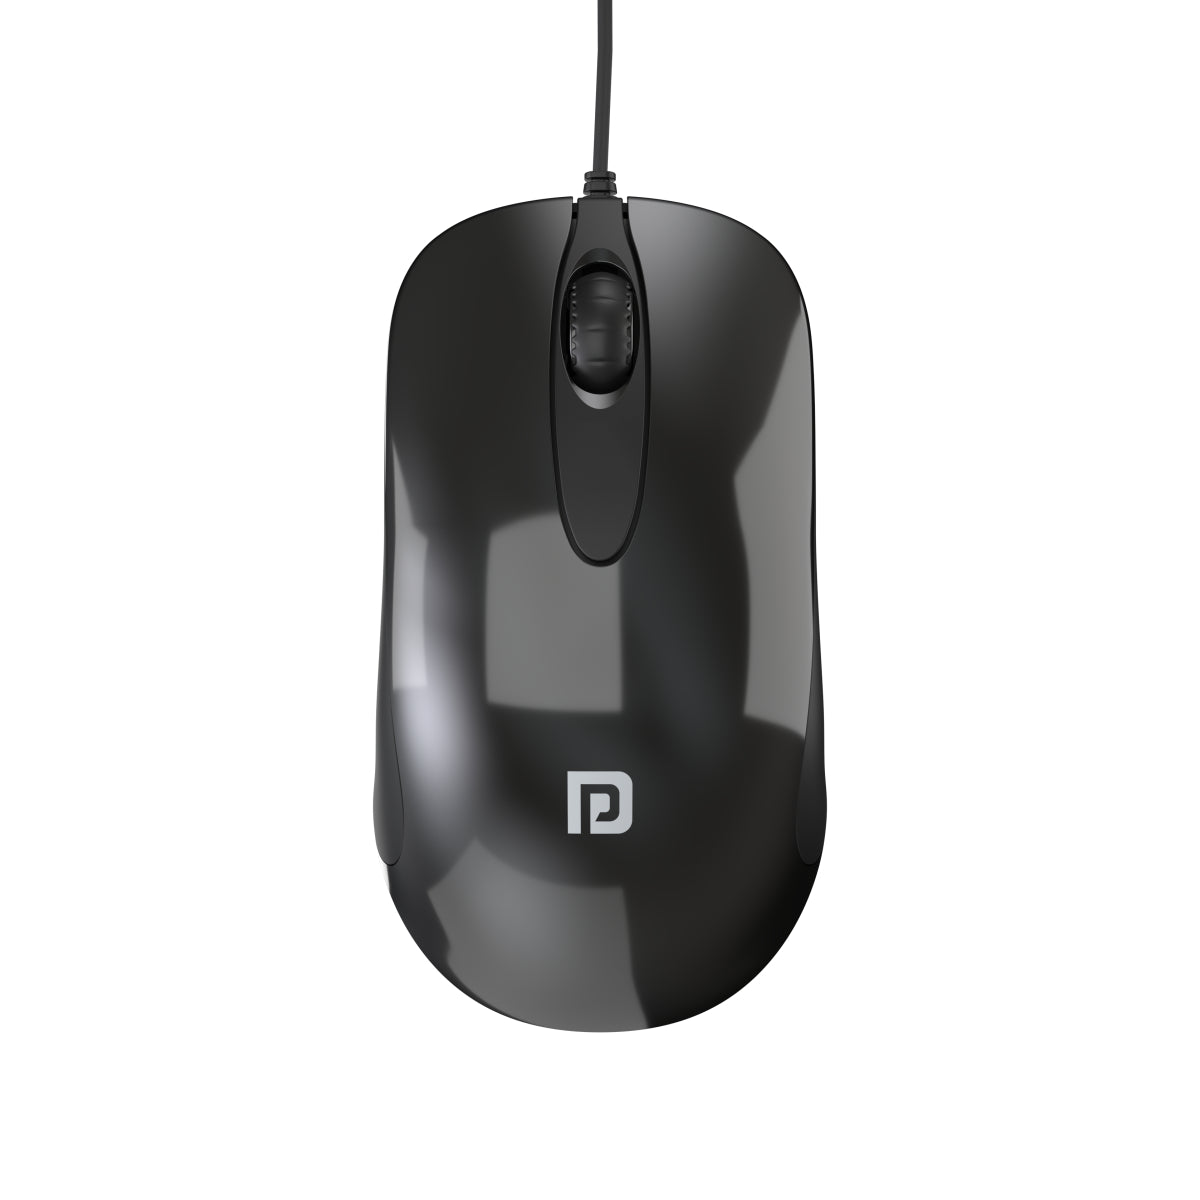 Portronics Toad 26 wired mouse with responsive 1600 DPI for best performance.  Black